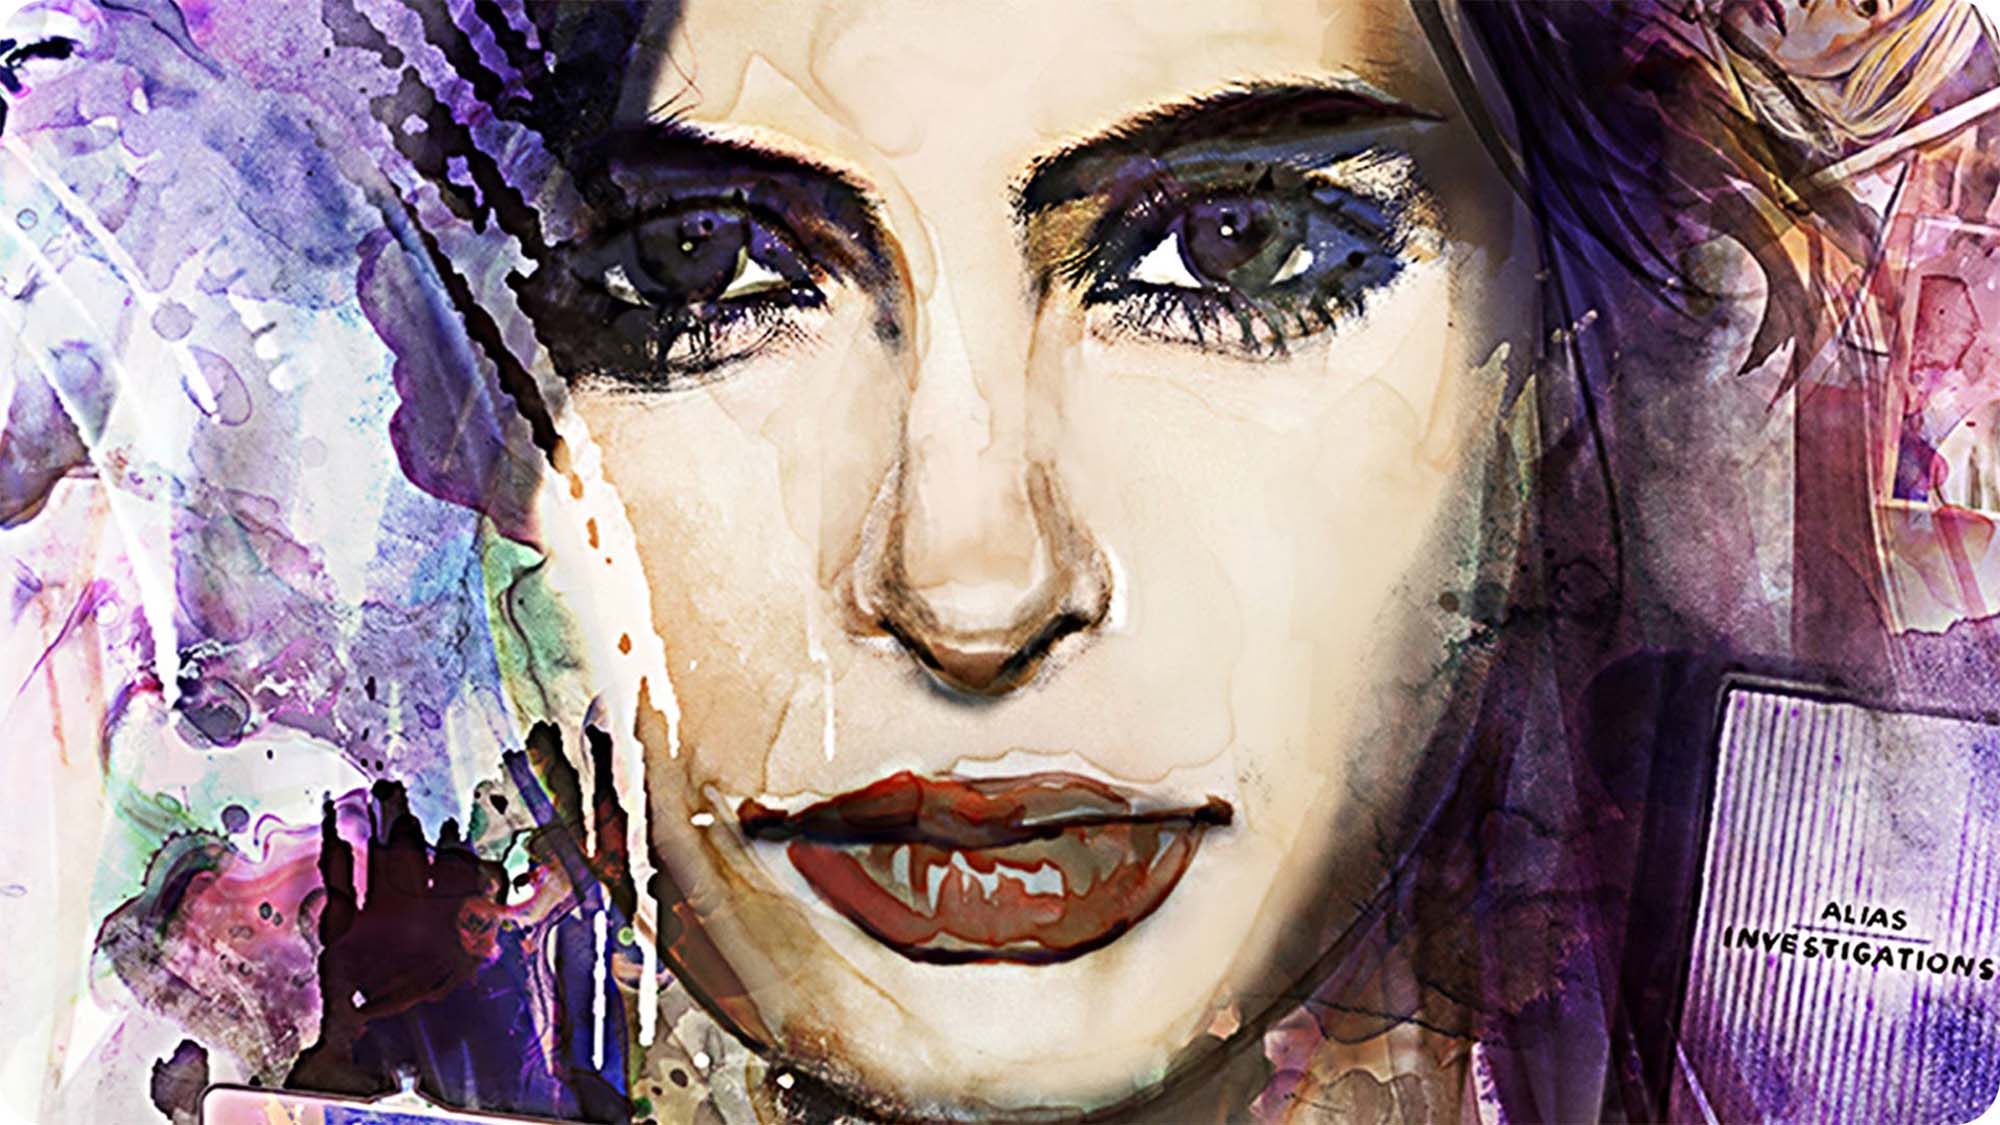 Krysten Ritter’s scowling, biting performance as Jessica Jones ranks high among our favorite addicts we can’t help but love despite their bad decisions.